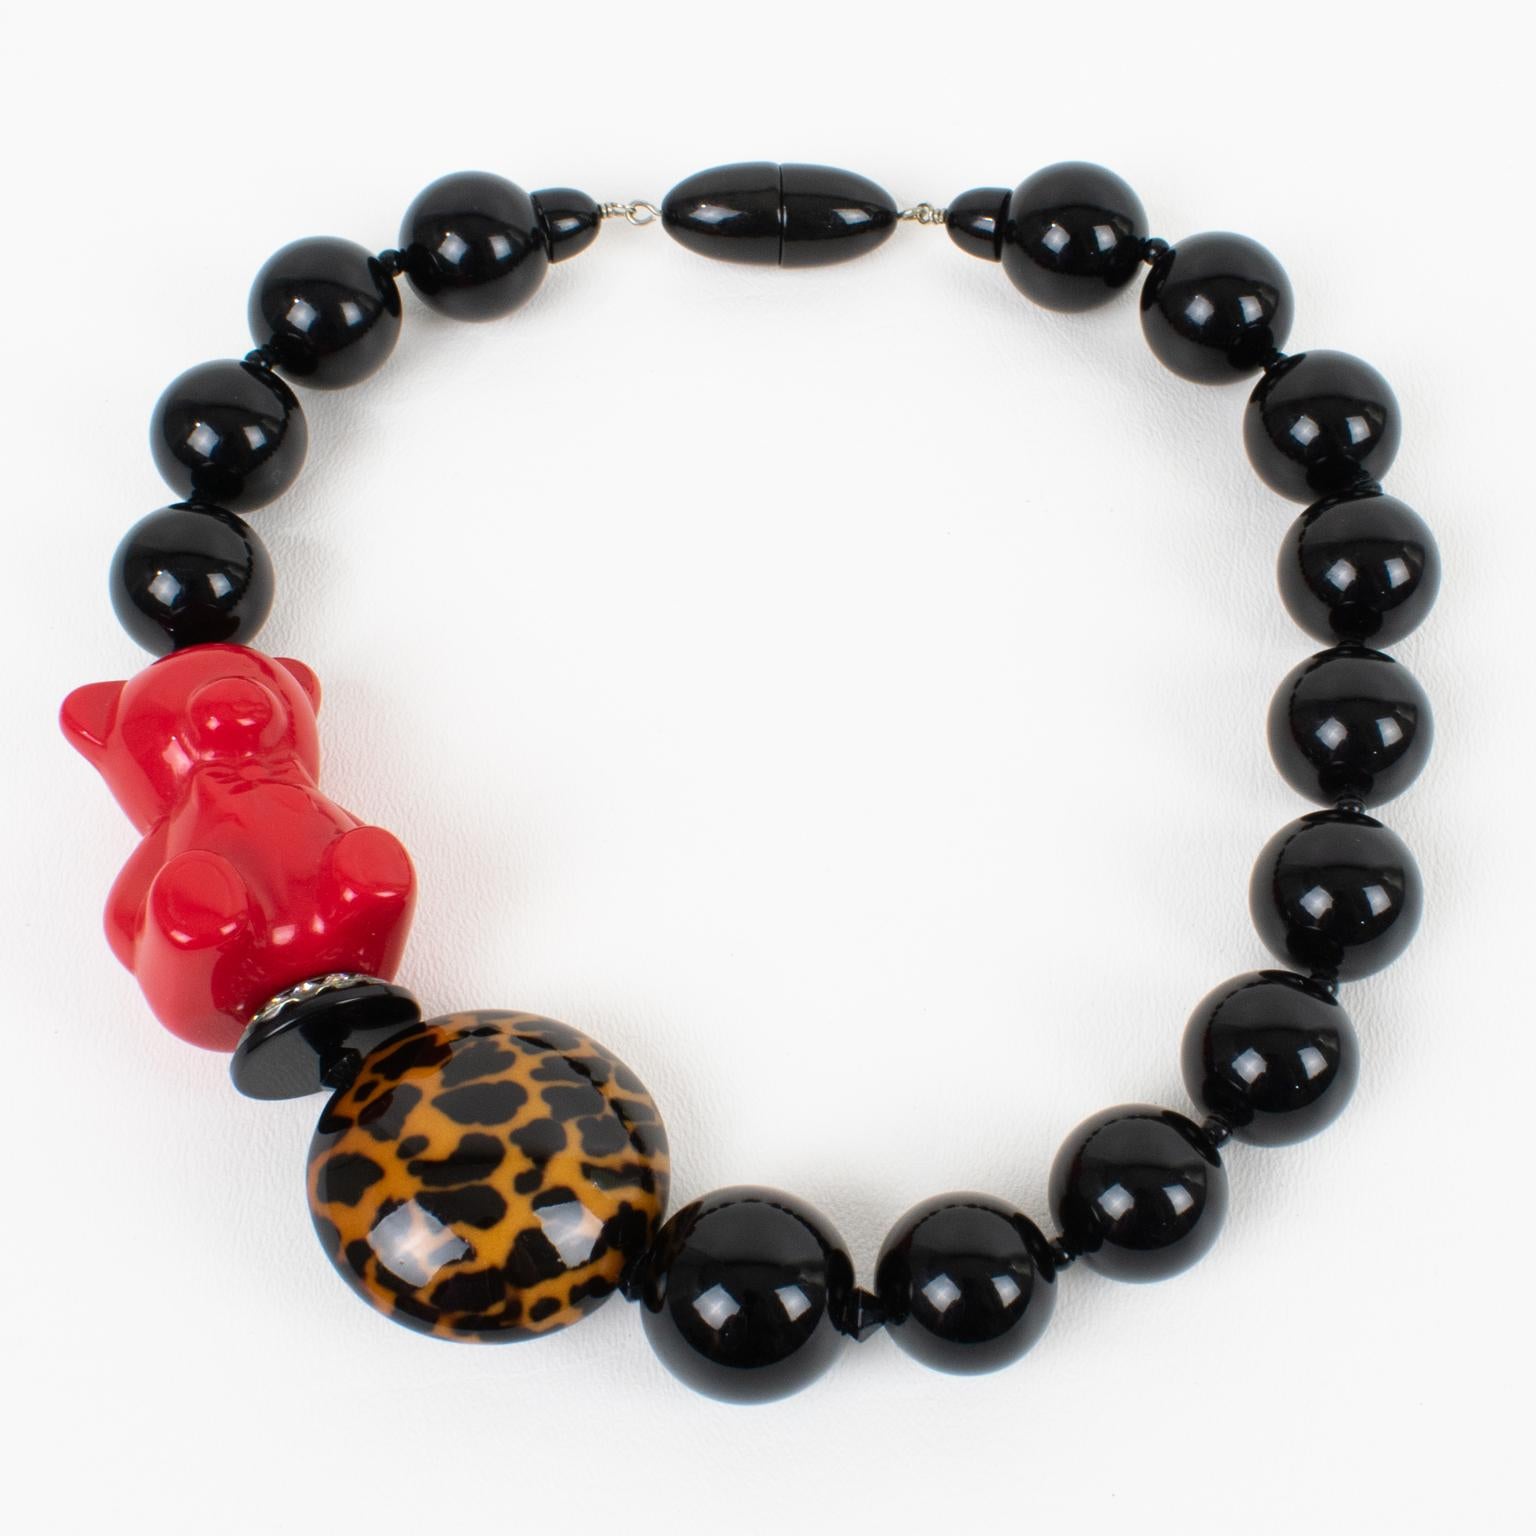 Angela Caputi Black Resin and Red Teddy Bear Choker Necklace For Sale ...